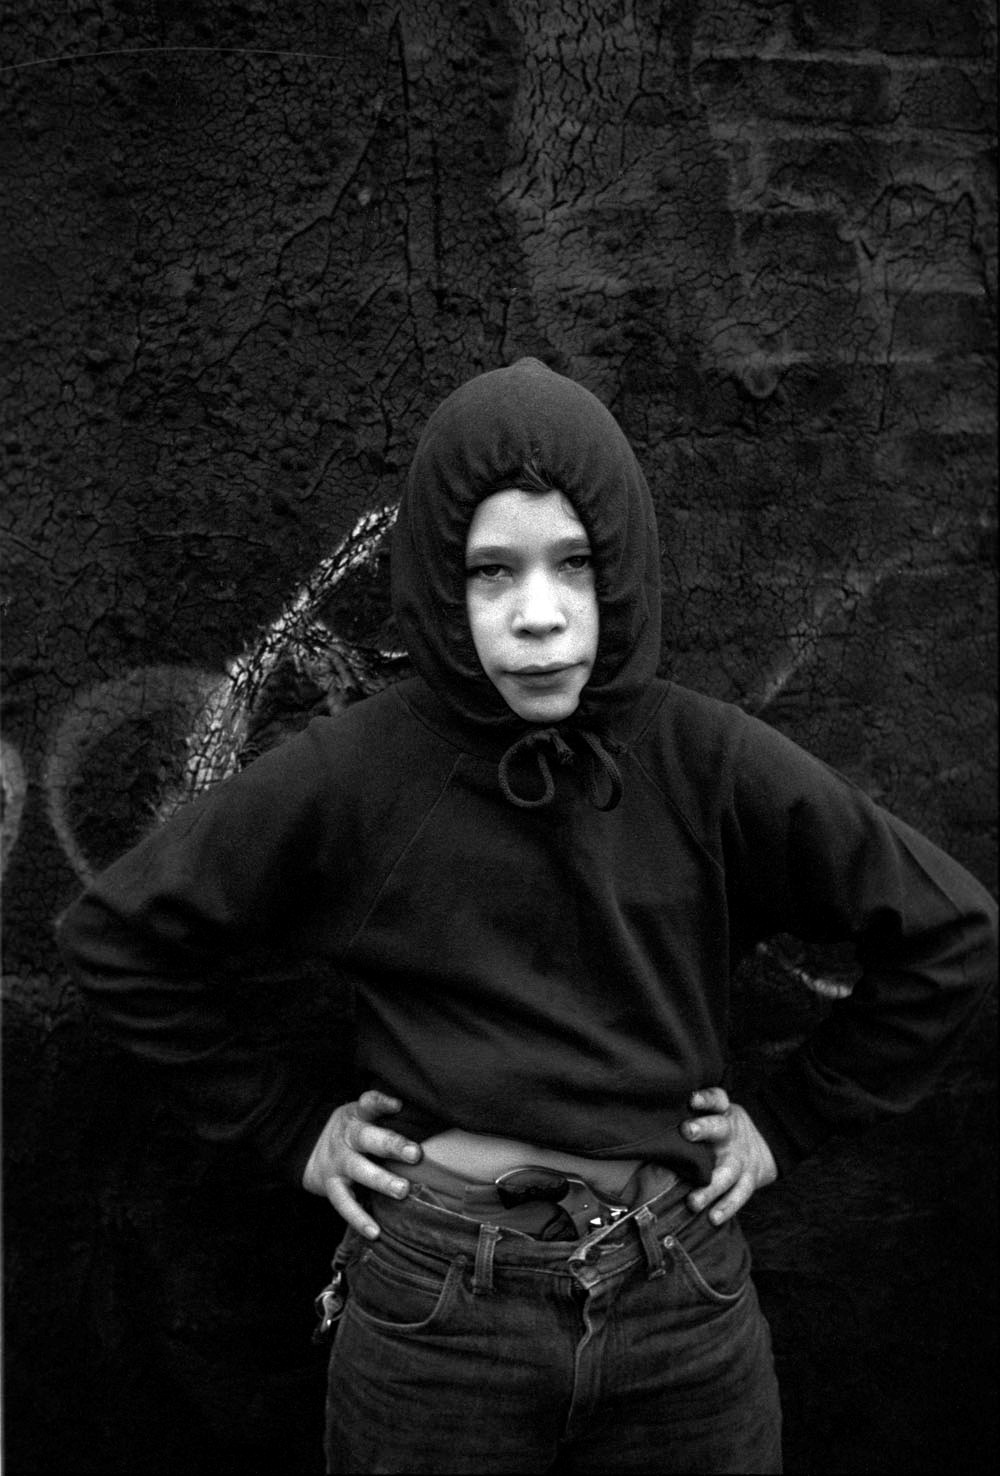 A Portrait Of Young Men Coming Of Age In Bronx 1977-2000